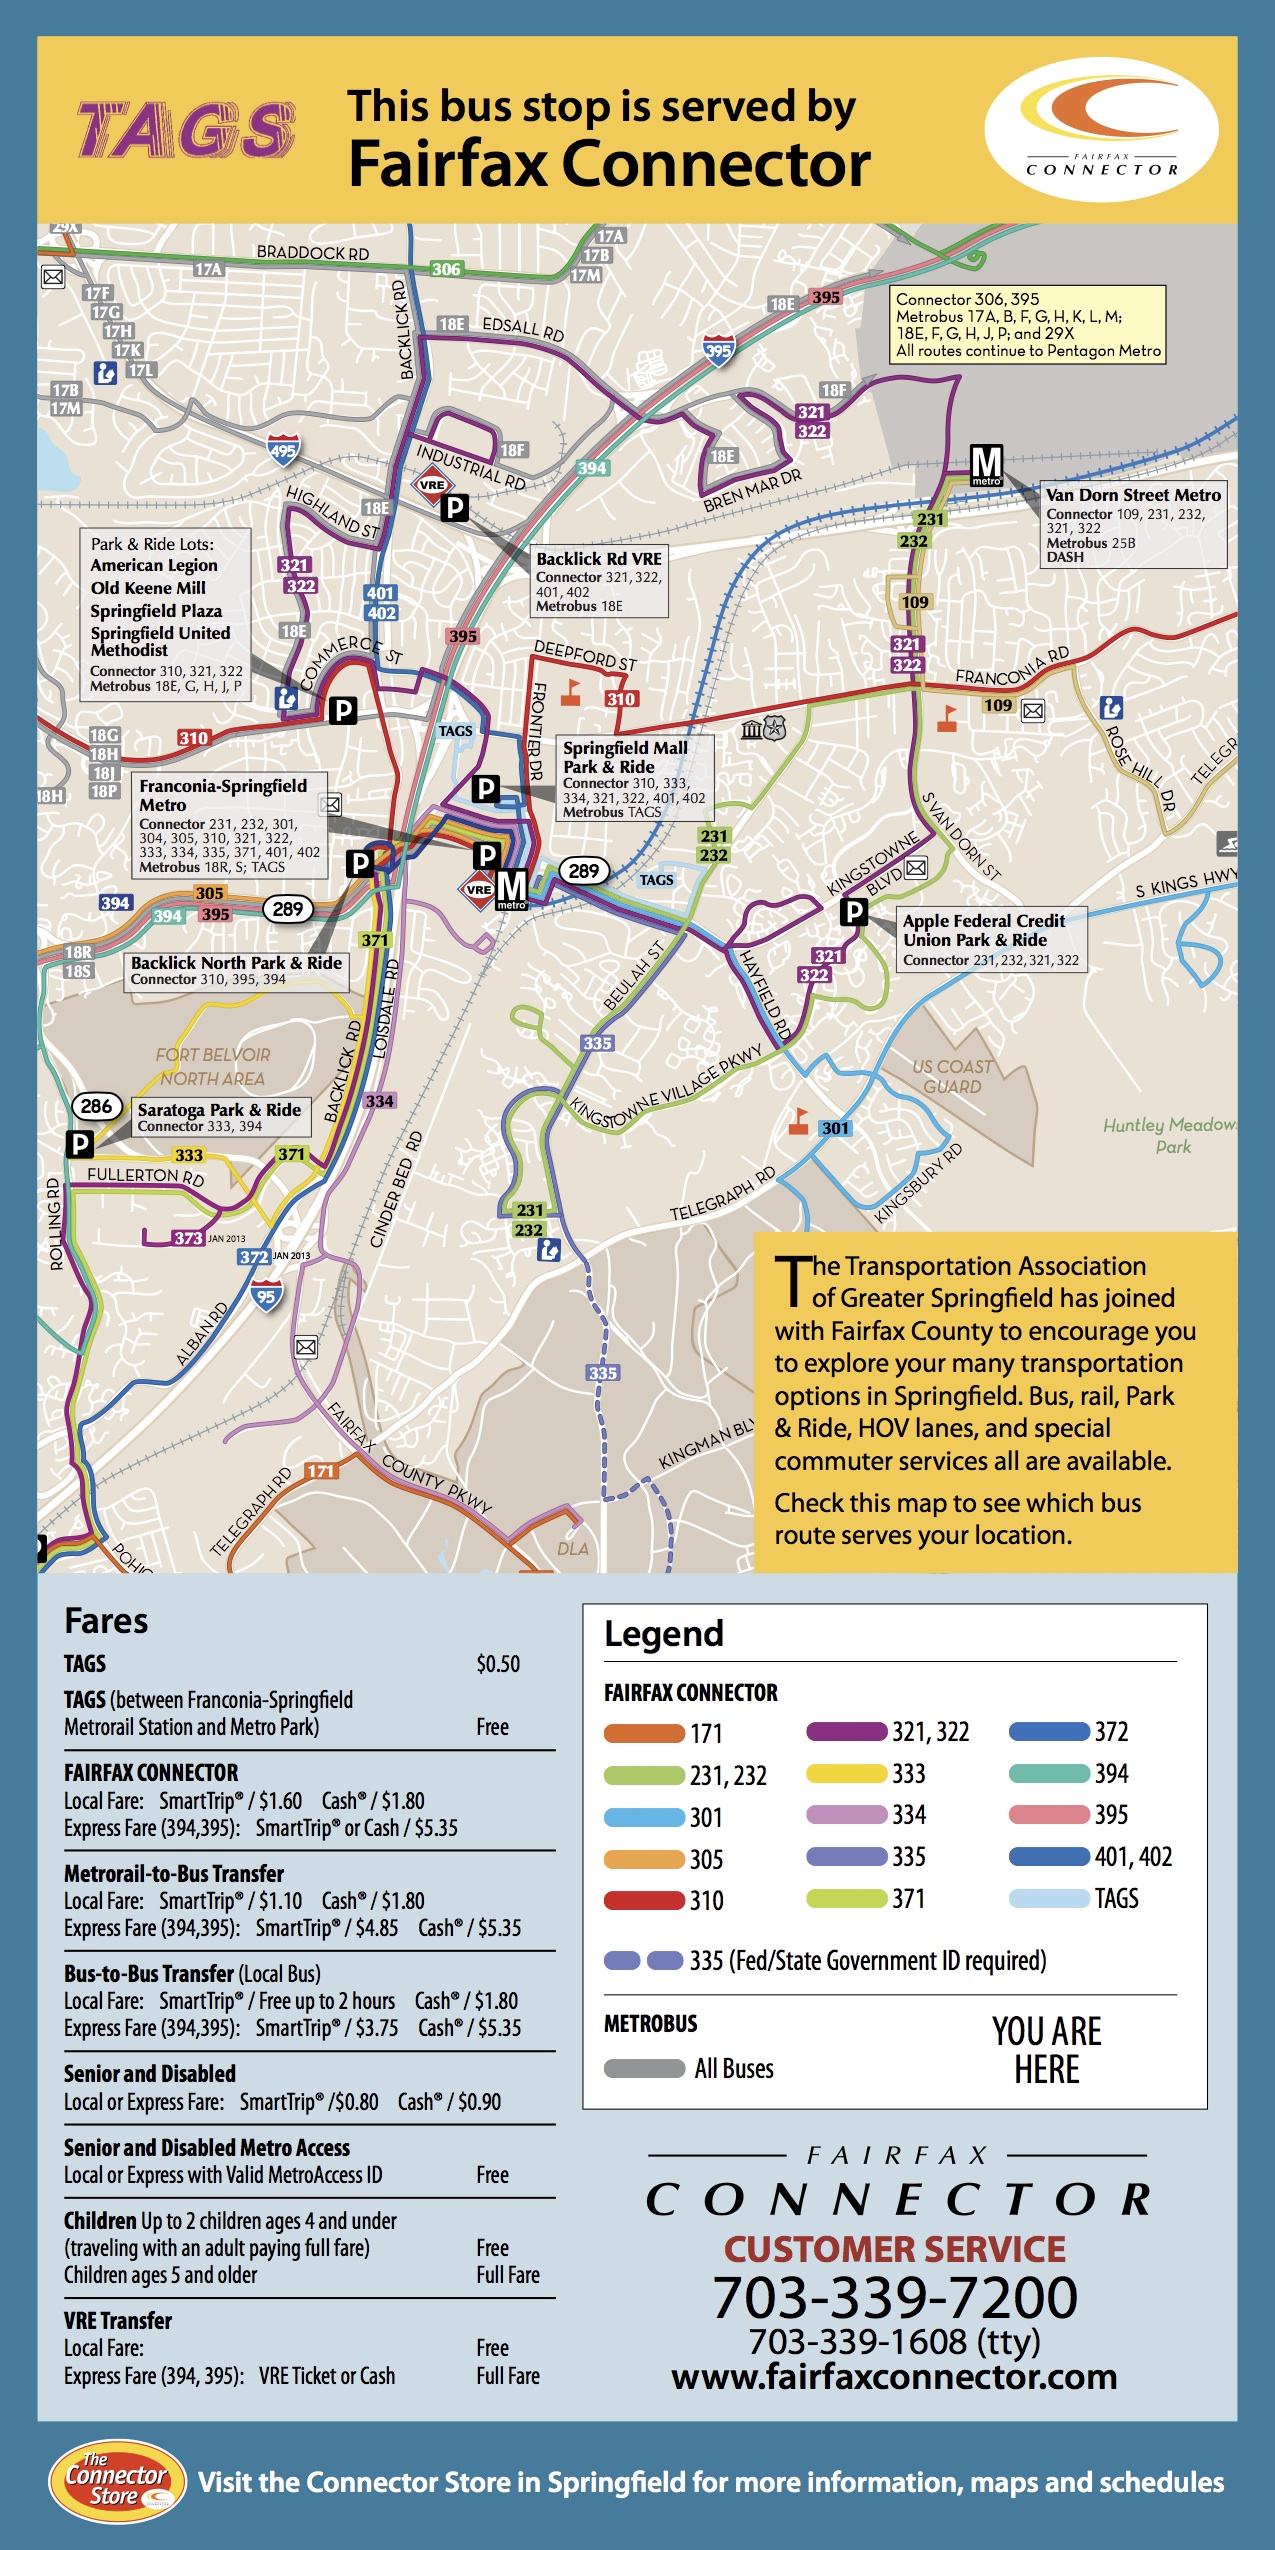 Fairfax County Department of Transportation is holding its third round public meeting on the Countywide Transit Network Study on July 10, 2013.